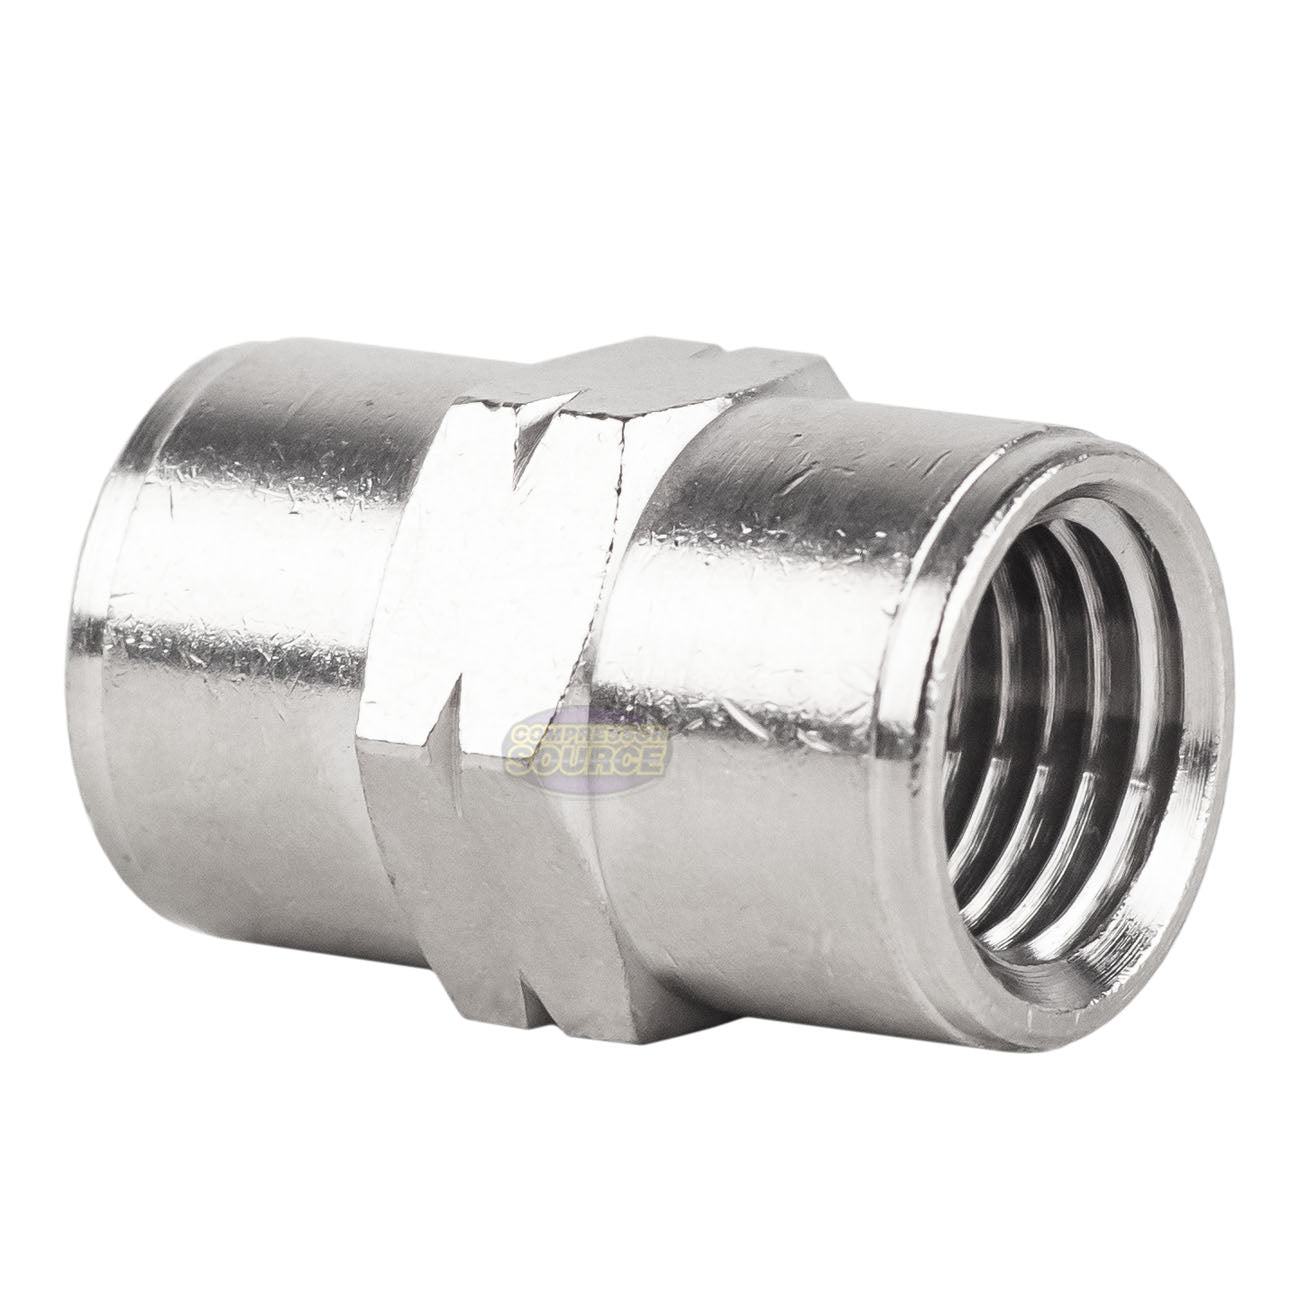 1/4" NPT Female Nickel Plated Brass Pipe Unions Adapter Fitting Connector 2 Pack